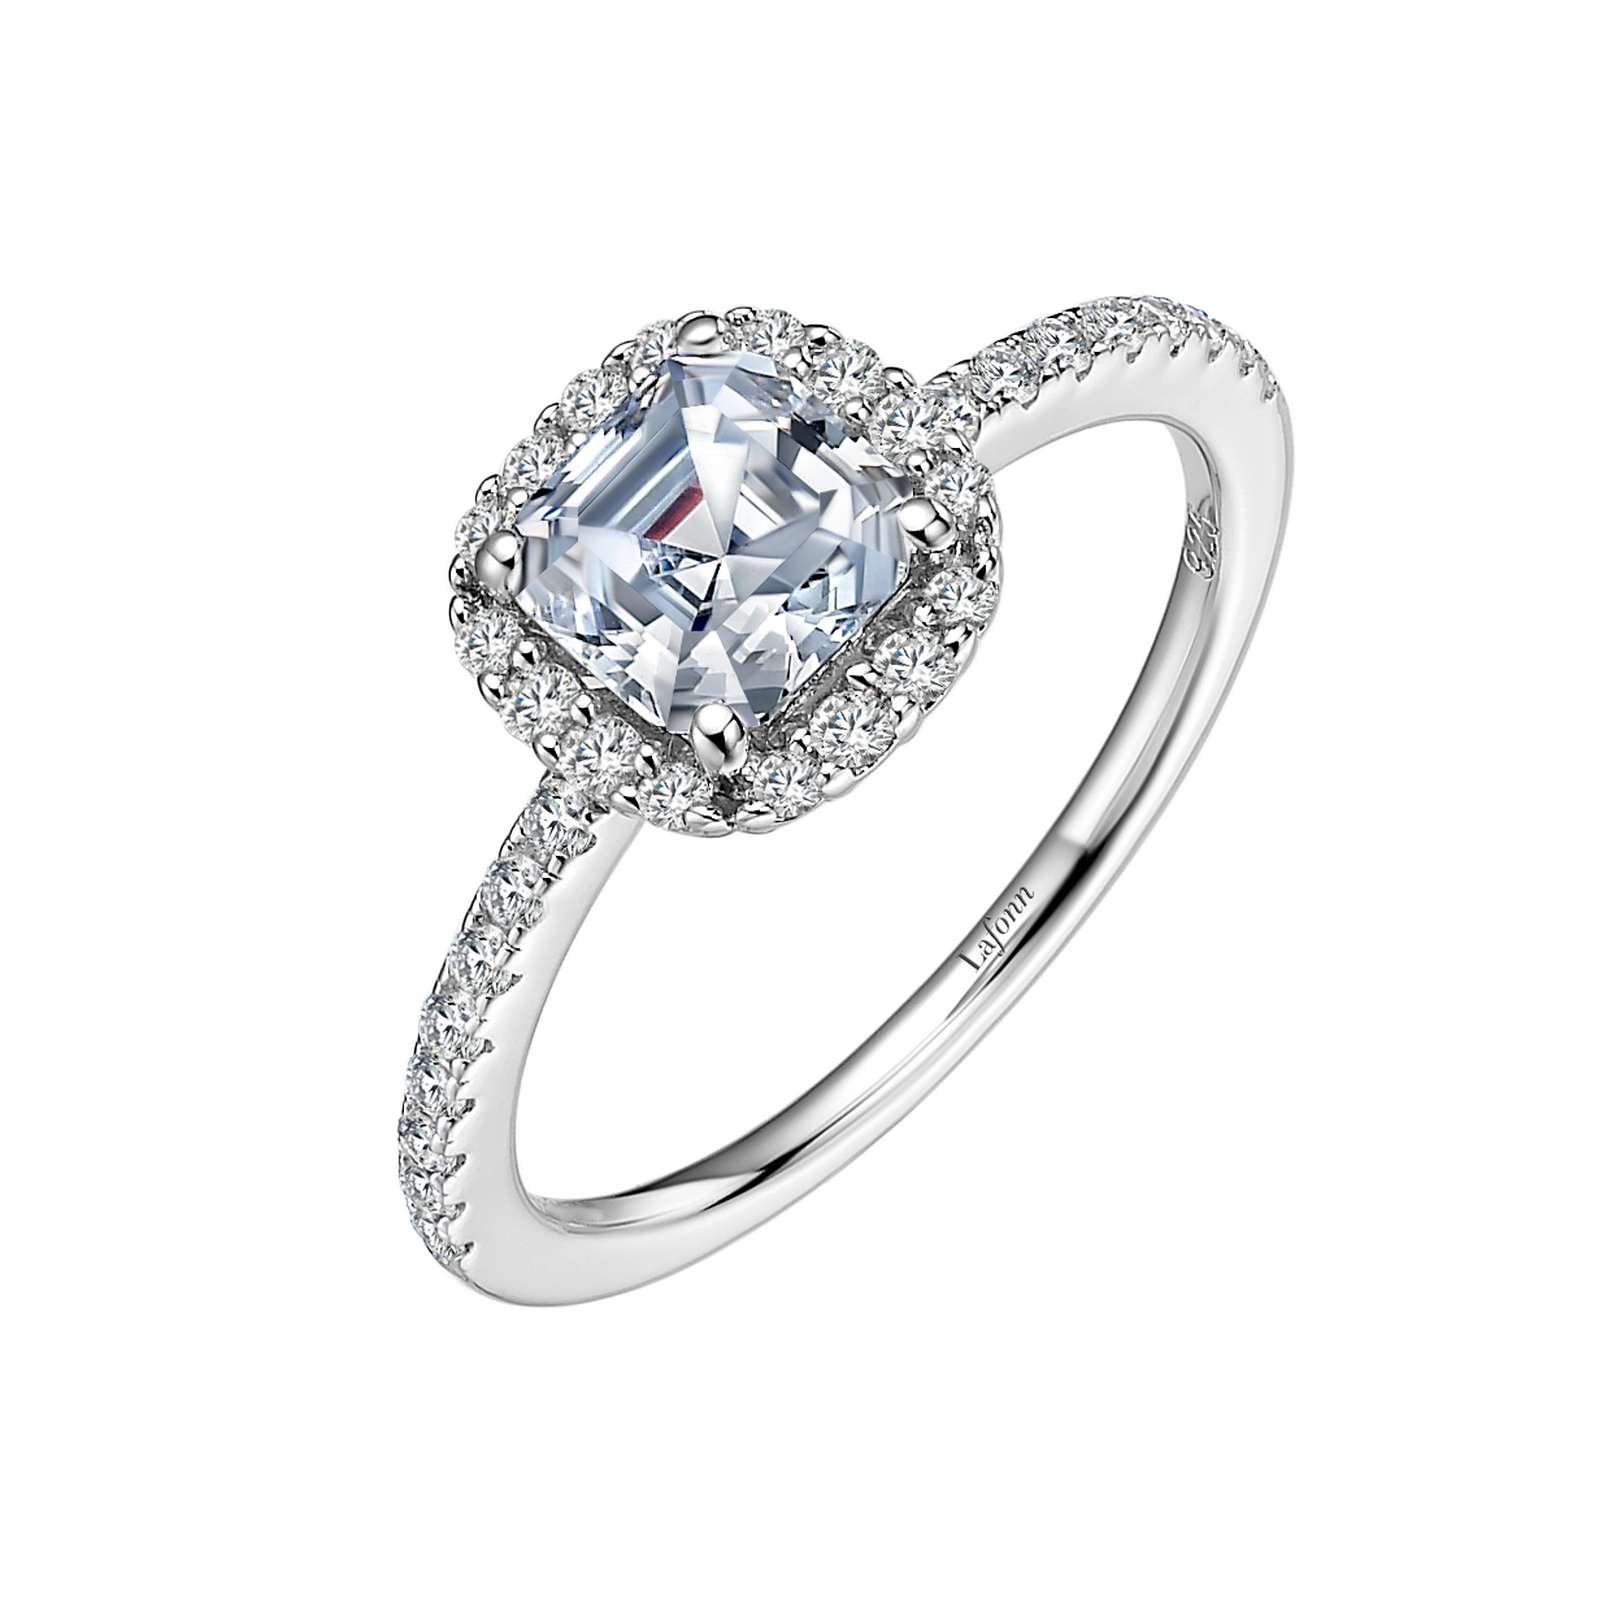 Asscher-Cut Halo Engagement Ring Griner Jewelry Co. Moultrie, GA